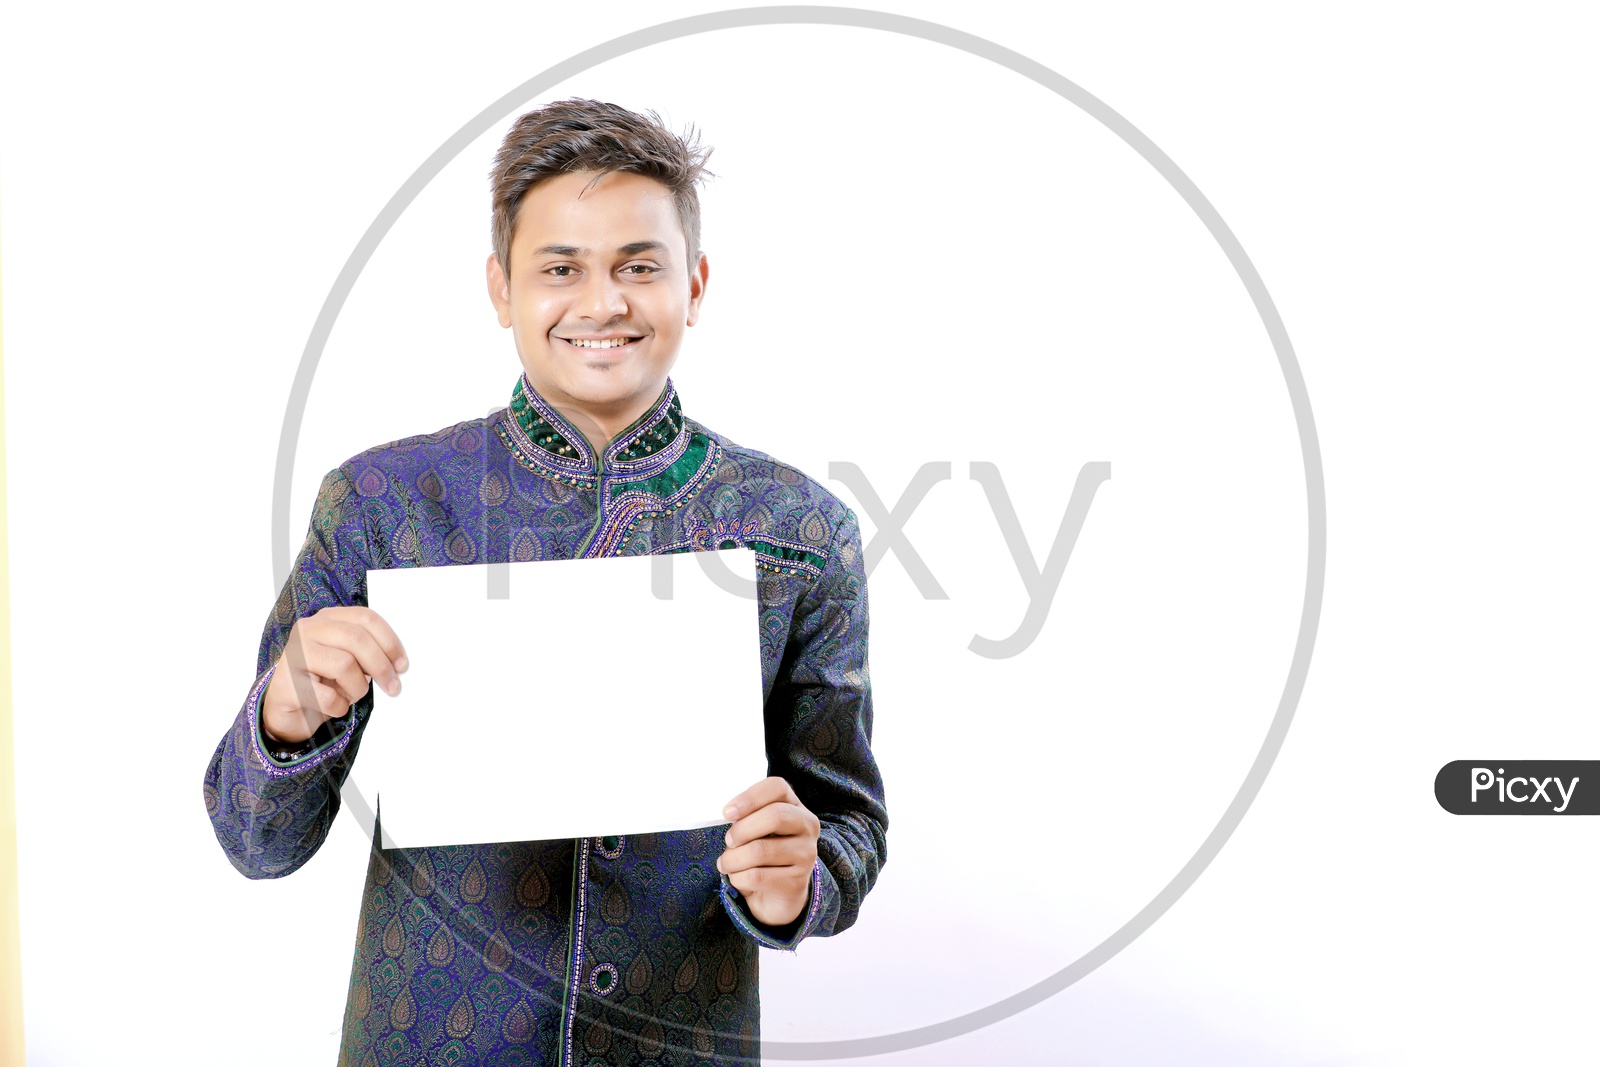 Indian Man Holding a White Placard in Hands on an Isolated White Background